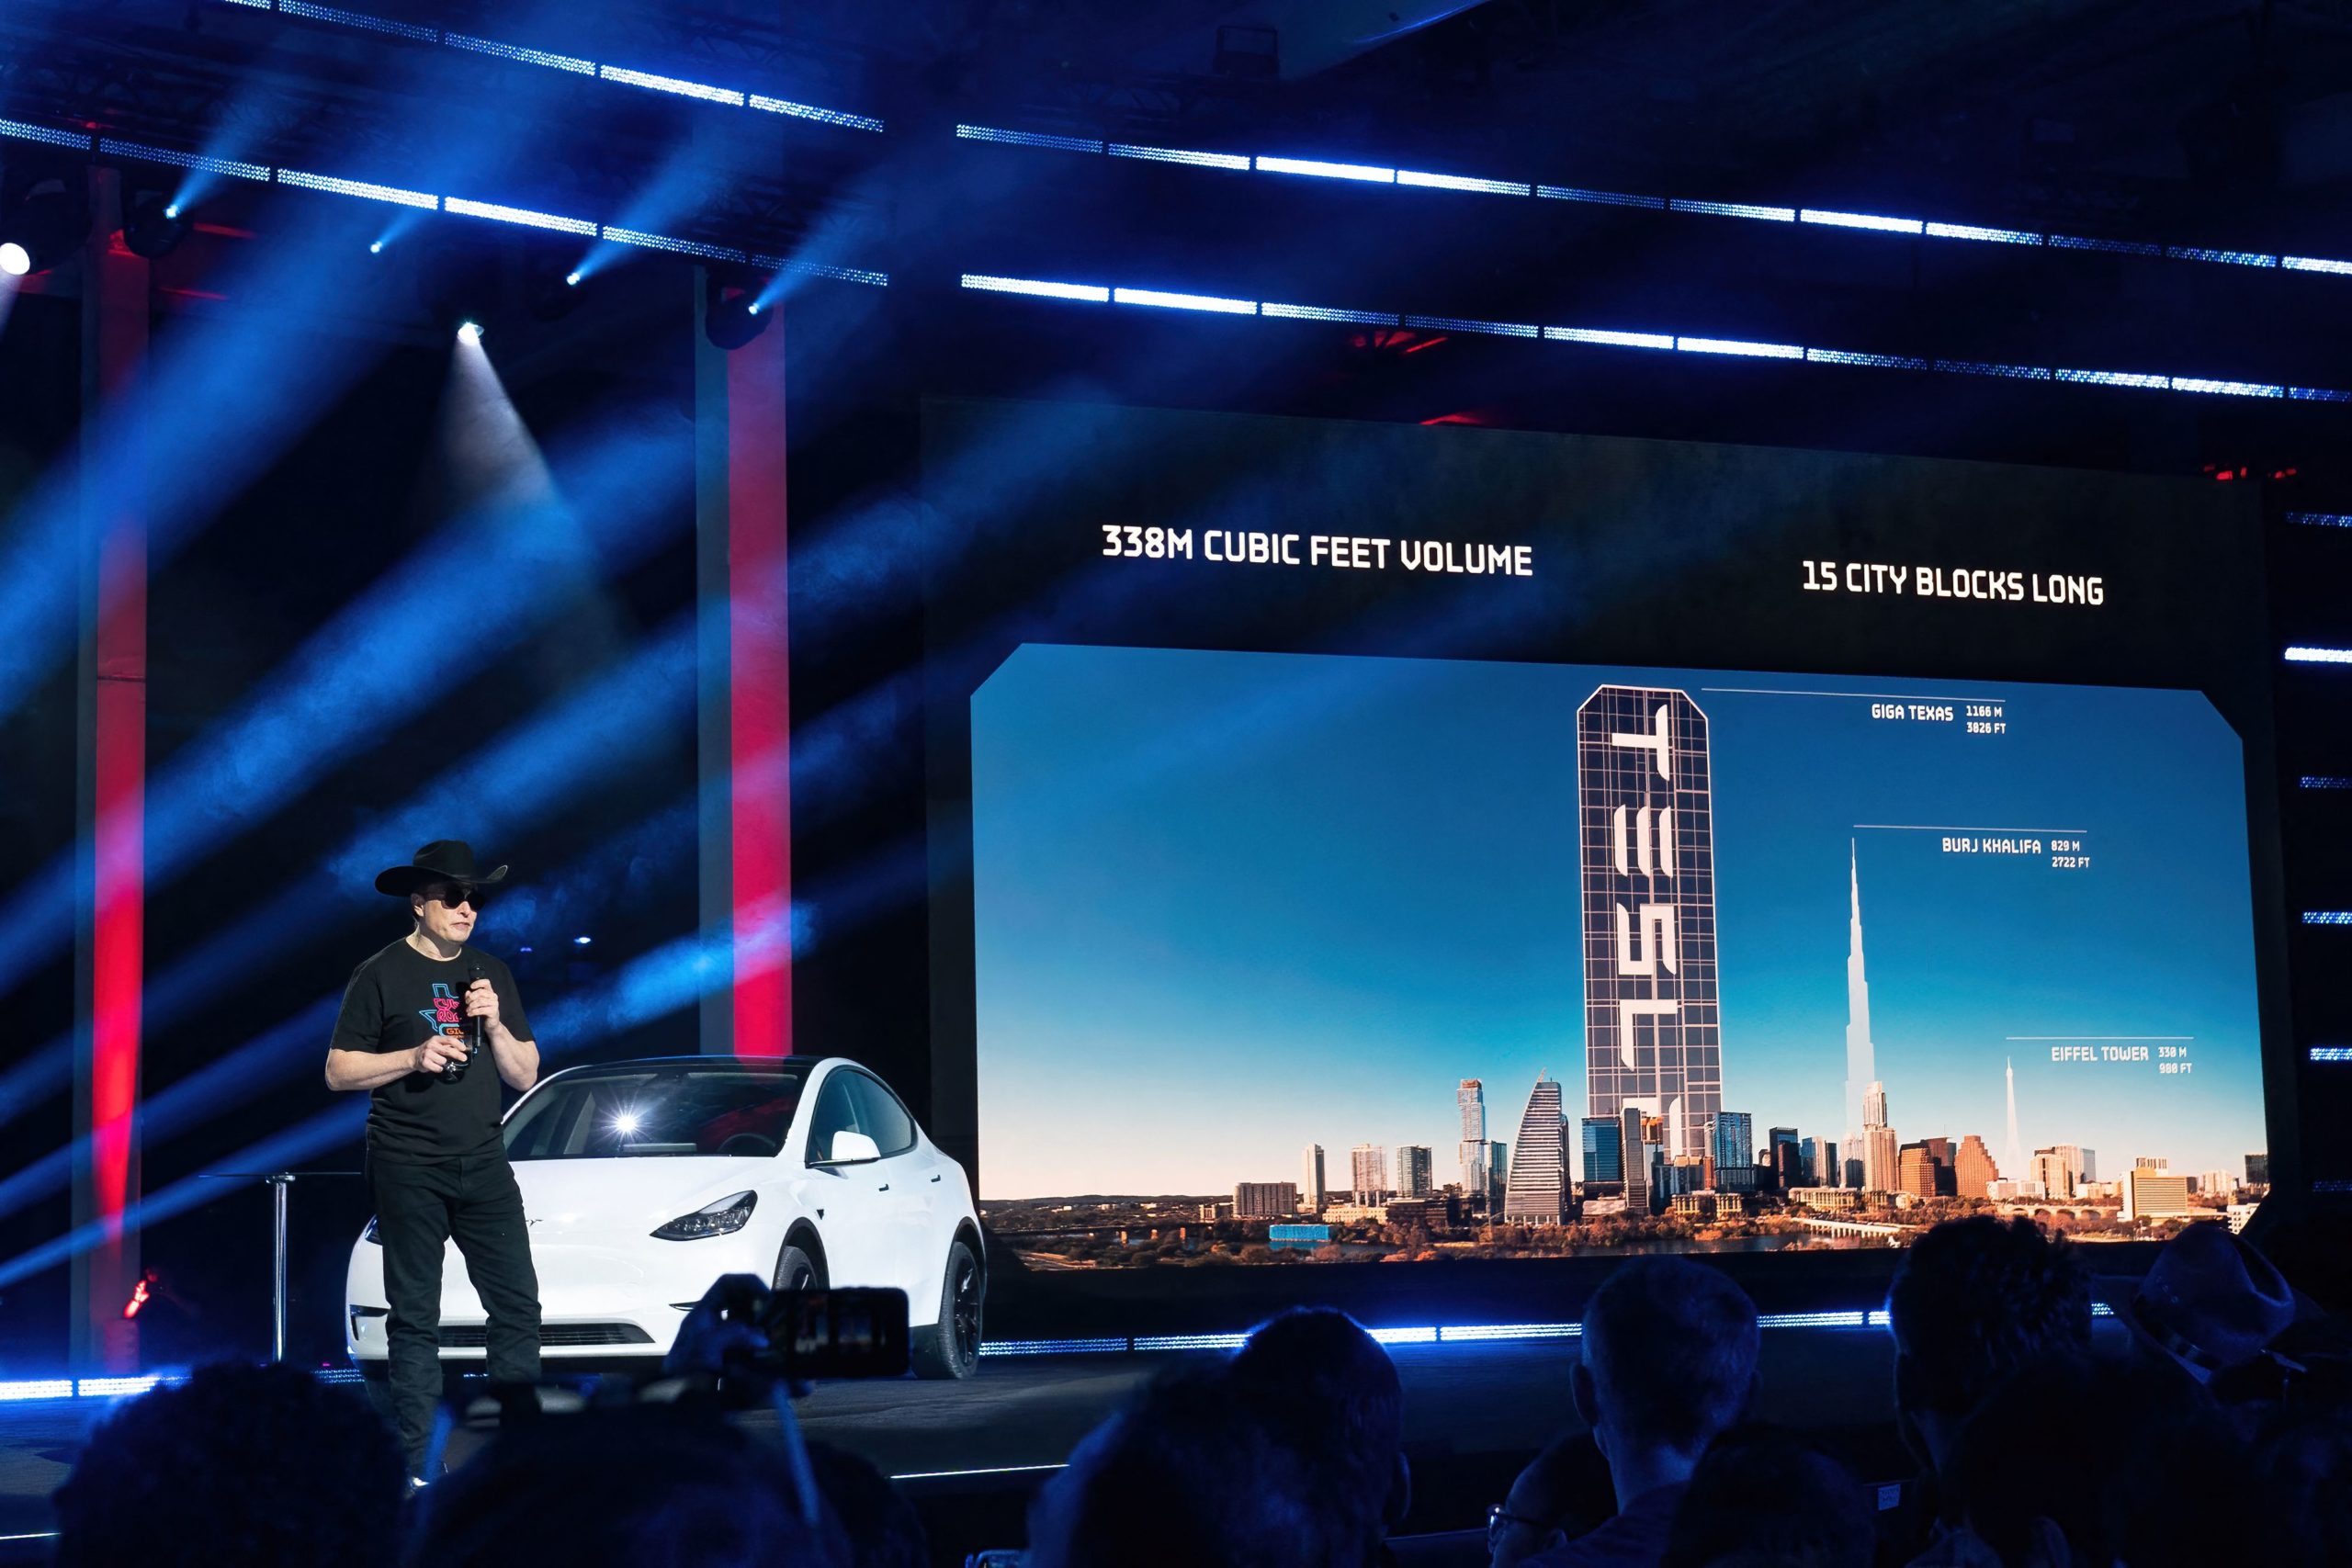 CEO of Tesla Motors Elon Musk speaks at the Tesla Giga Texas manufacturing "Cyber Rodeo" grand opening party on April 7, 2022 in Austin, Texas. (Photo by SUZANNE CORDEIRO/AFP via Getty Images)